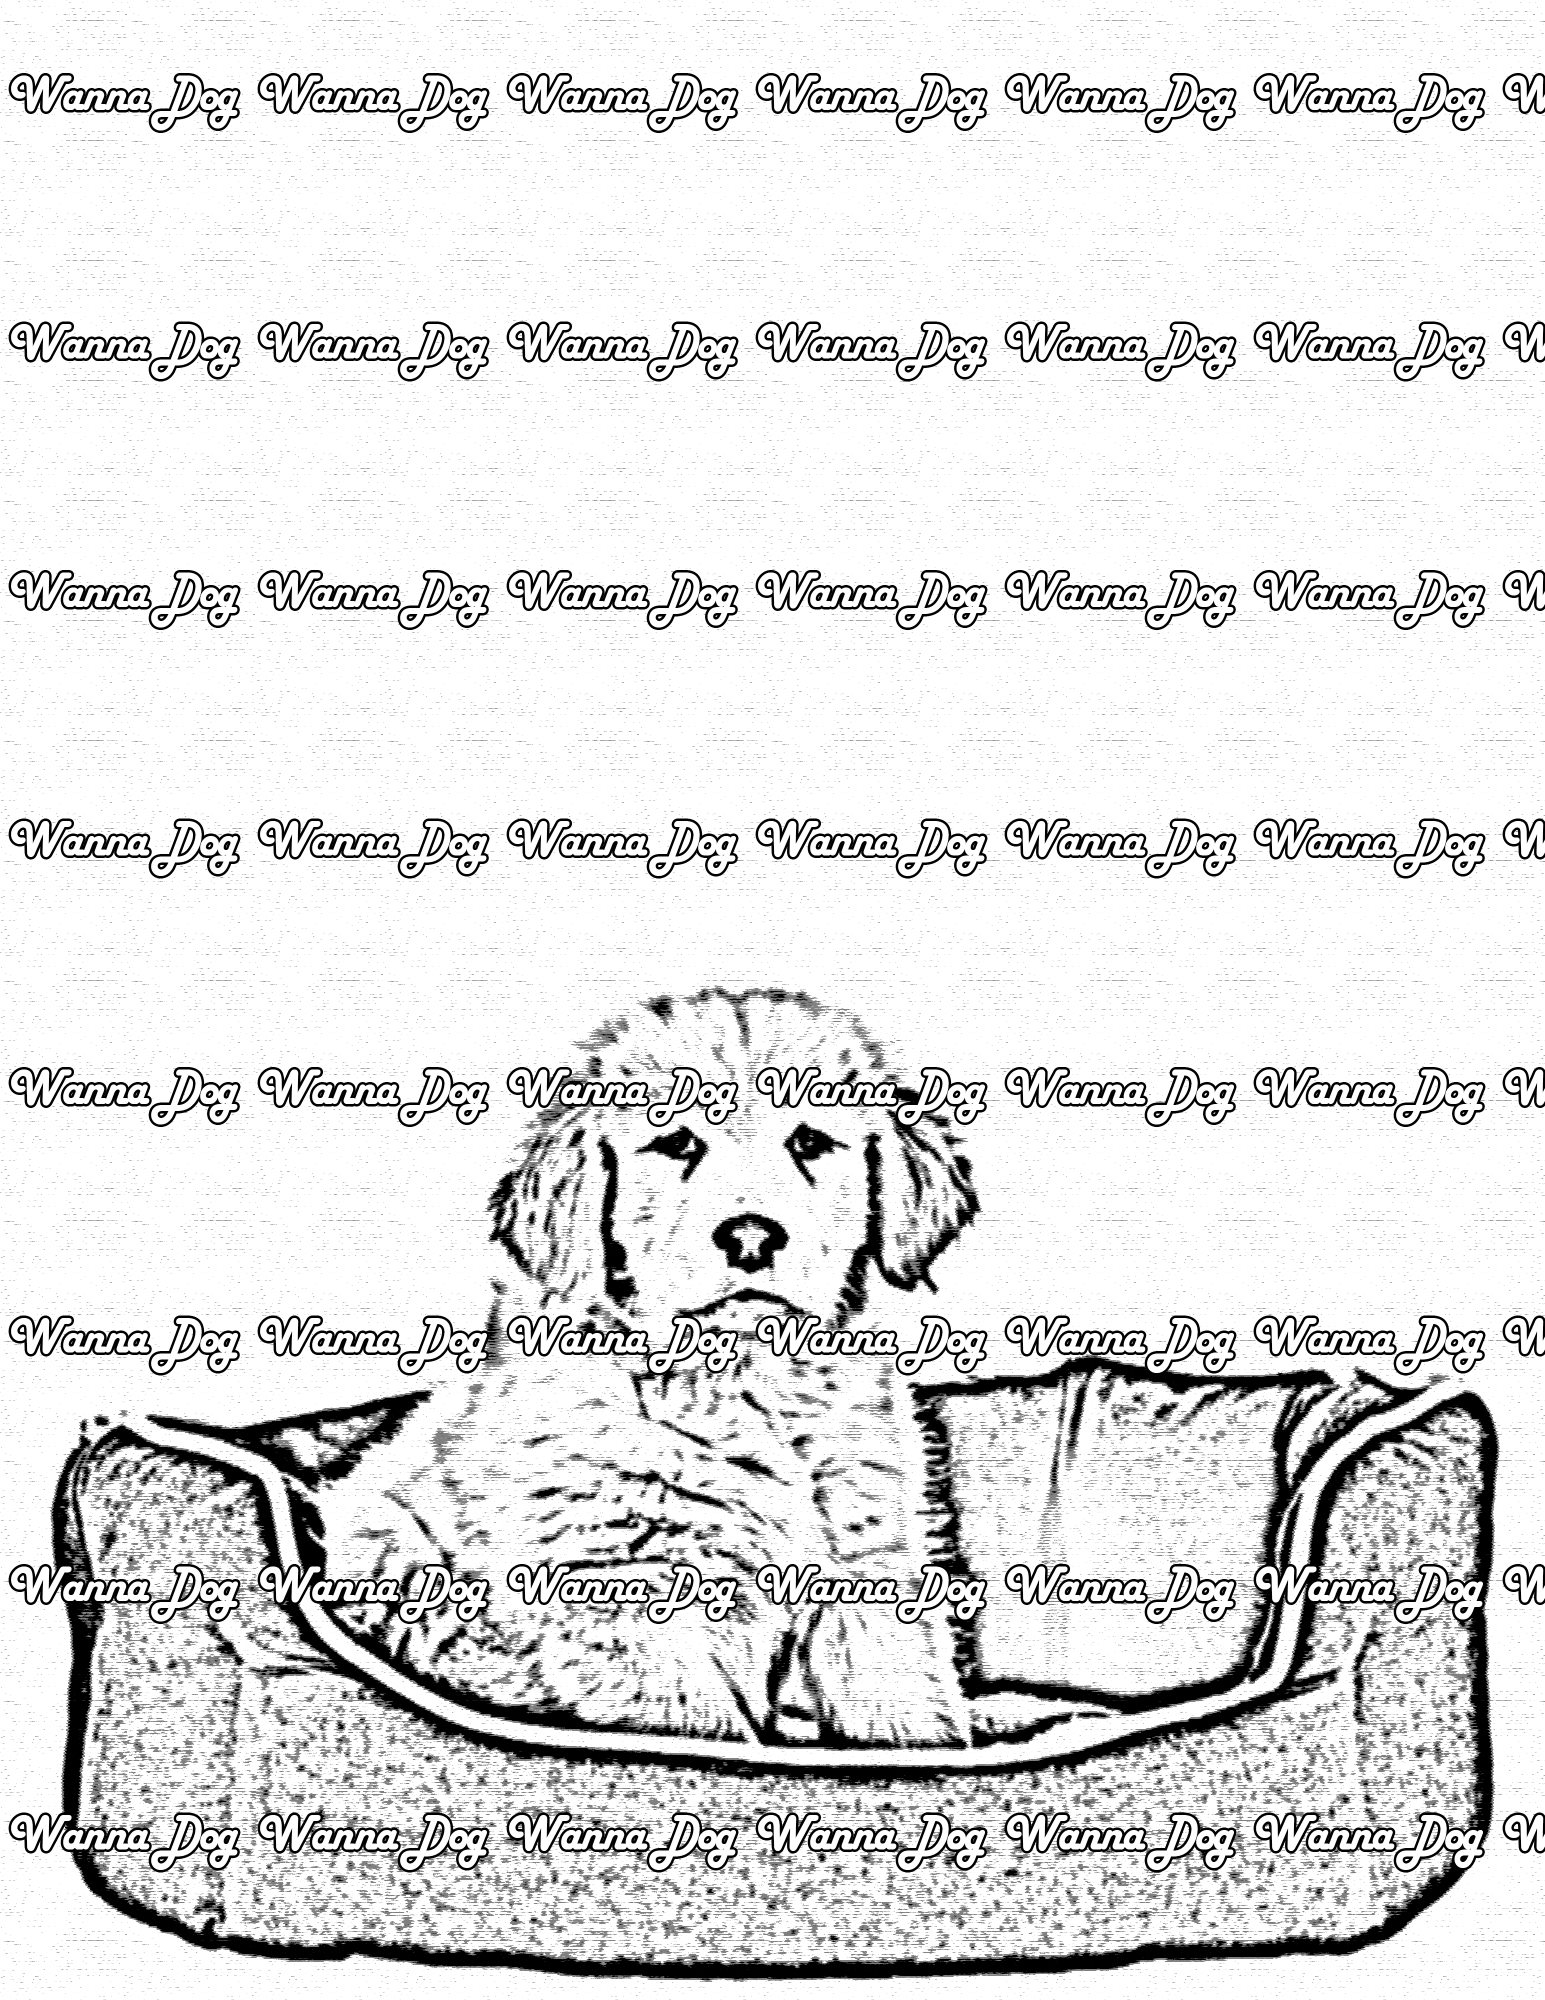 Golden Retriever Puppy Coloring Page of a Golden Retriever Puppy sitting in a dog bed